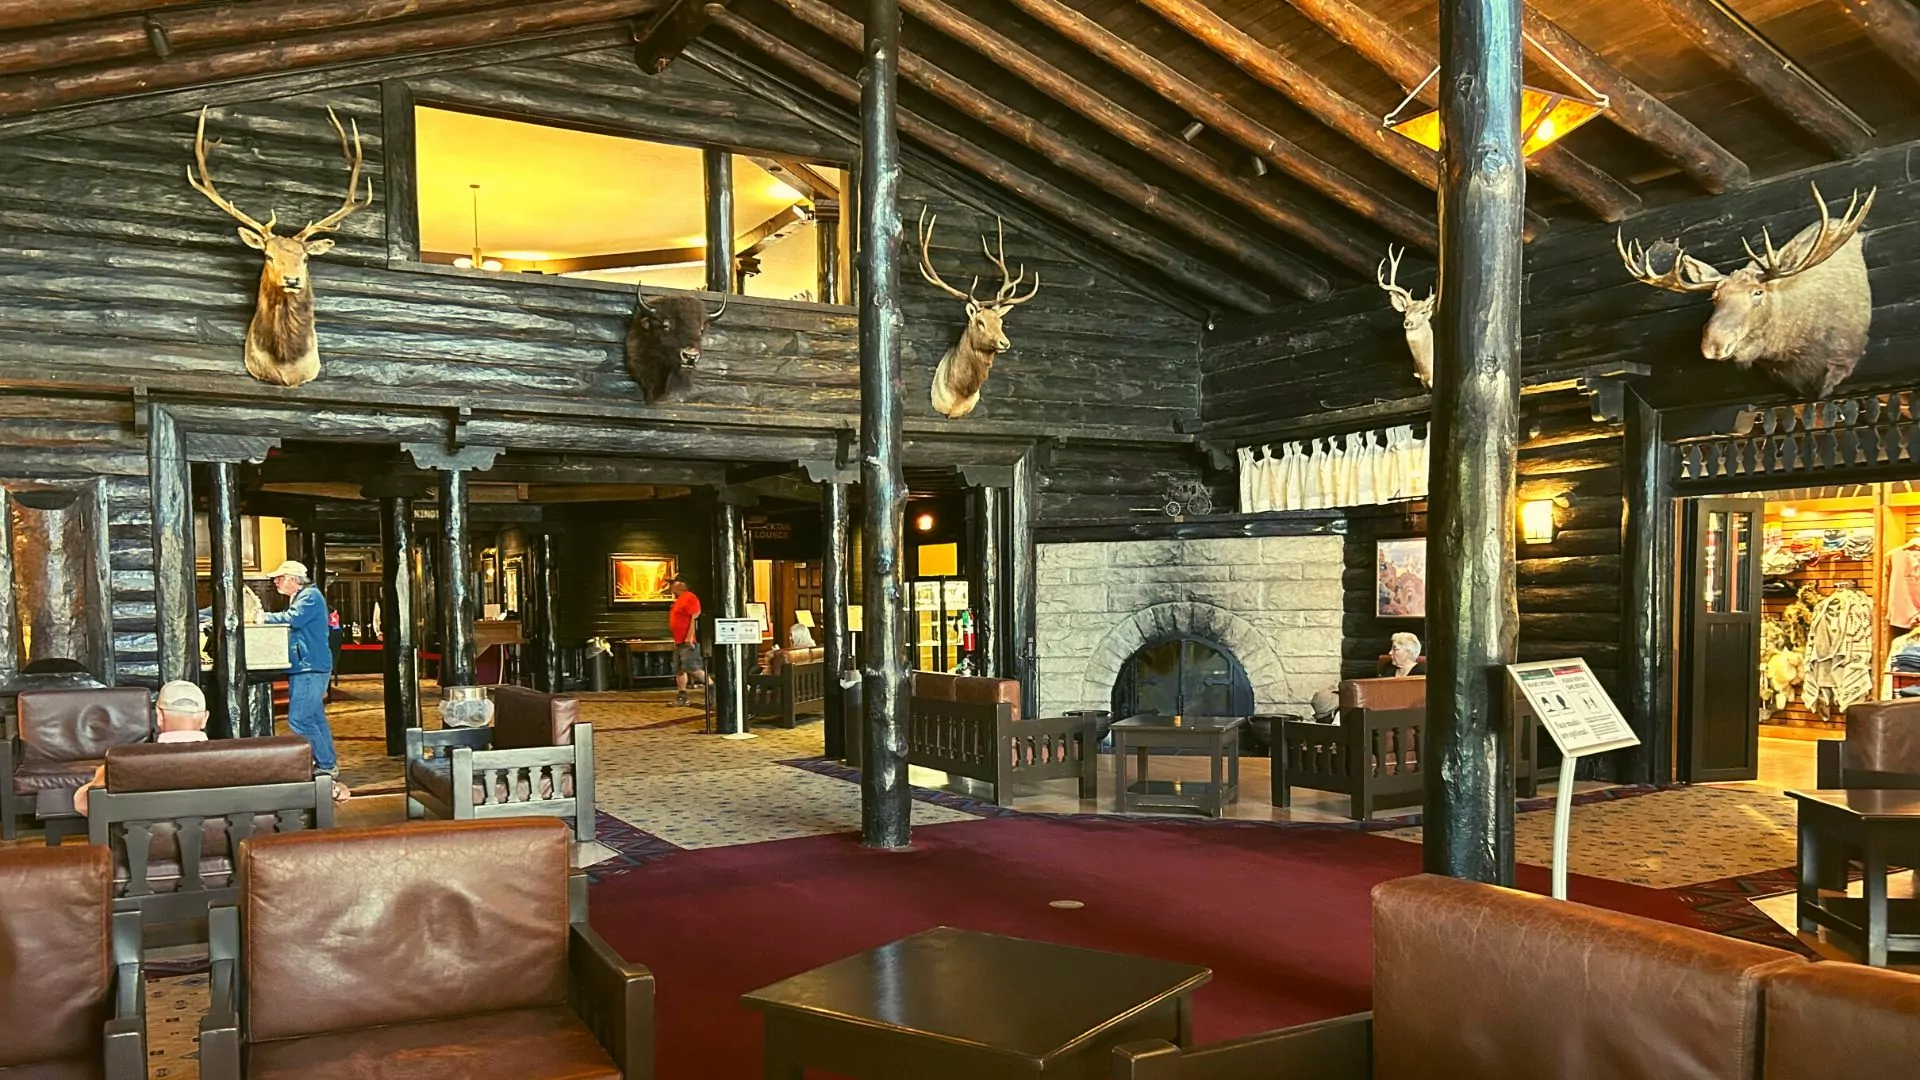 Log cabin-styled lobby of historic National Park lodge